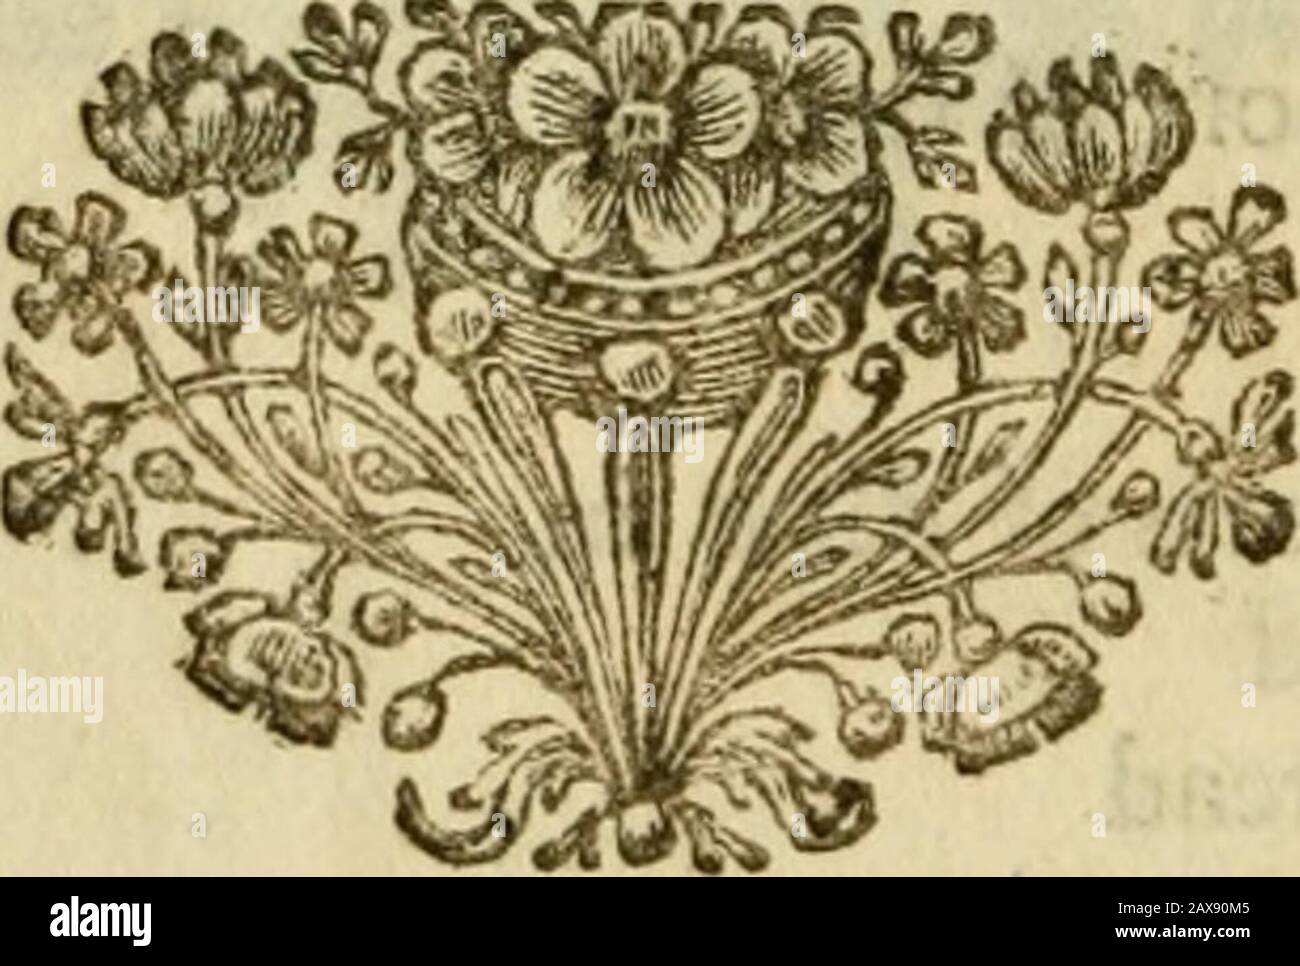 Short introduction to gardening, or, A guide to gentlemen and ladies, in furnishing their gardens, being several useful catalogues of fruits and flowers . ? 45;46 49 ^ ( S7 ) r ioWE RS for Spreading Edgings, markd SE. D Sorts of F L o w E R s inOuble blue VioletCreeping Buglofs Sea-Pink Sort of ditto in Sort of ditto inBlue Hyacinth of Peru Sort of ditto inMountain Dwarf Pink Sort of ditto in, Double Camomile. IN*^ •Alon. Fa. 7^5 Jan. 38 29 Apr. 41 11 May 42 31 June 43 9 oa. 47 TTIW I in ,IHJ.M (j£2 Fi-QWERS for Pots, markd P. N^^.Mon.Fa. R I Sorts of F L o w E R s inOyal Widow AuriculaDanae A Stock Photo